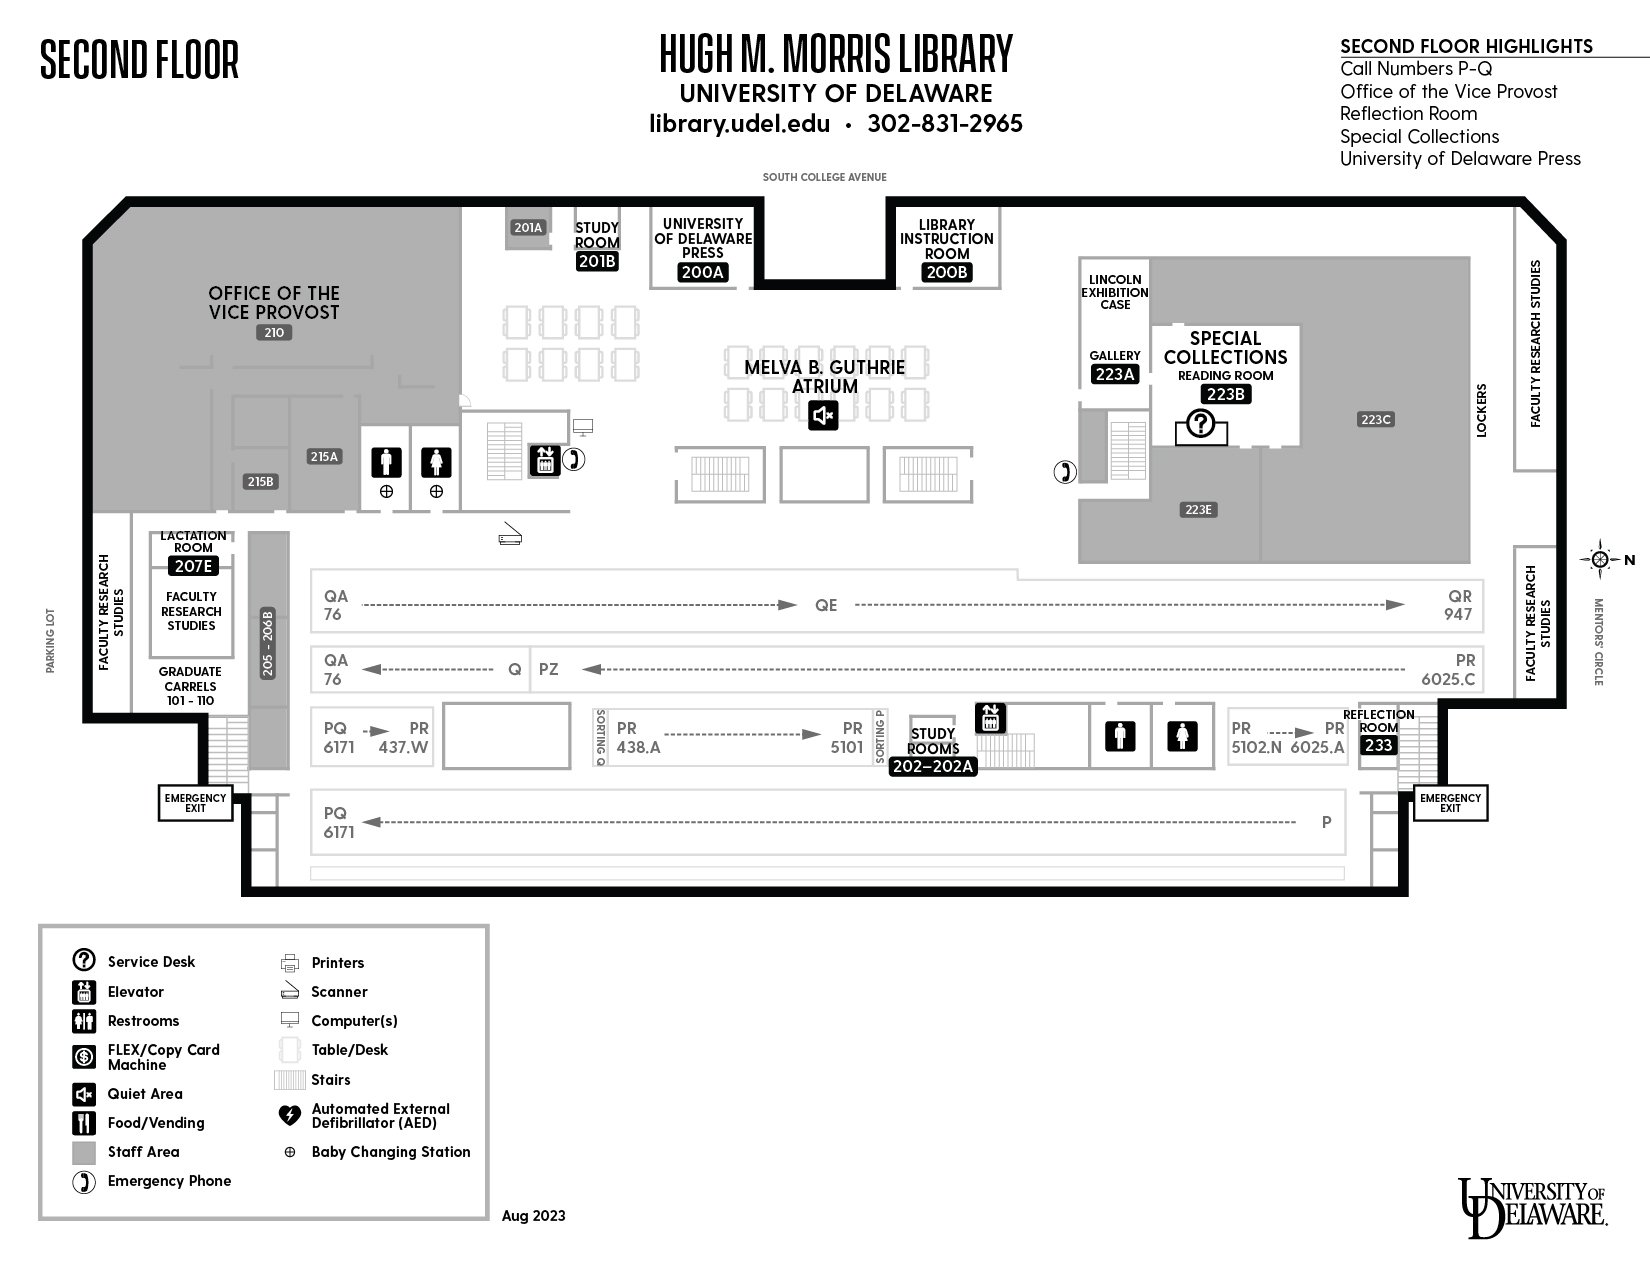 UD Library Second Floor Map